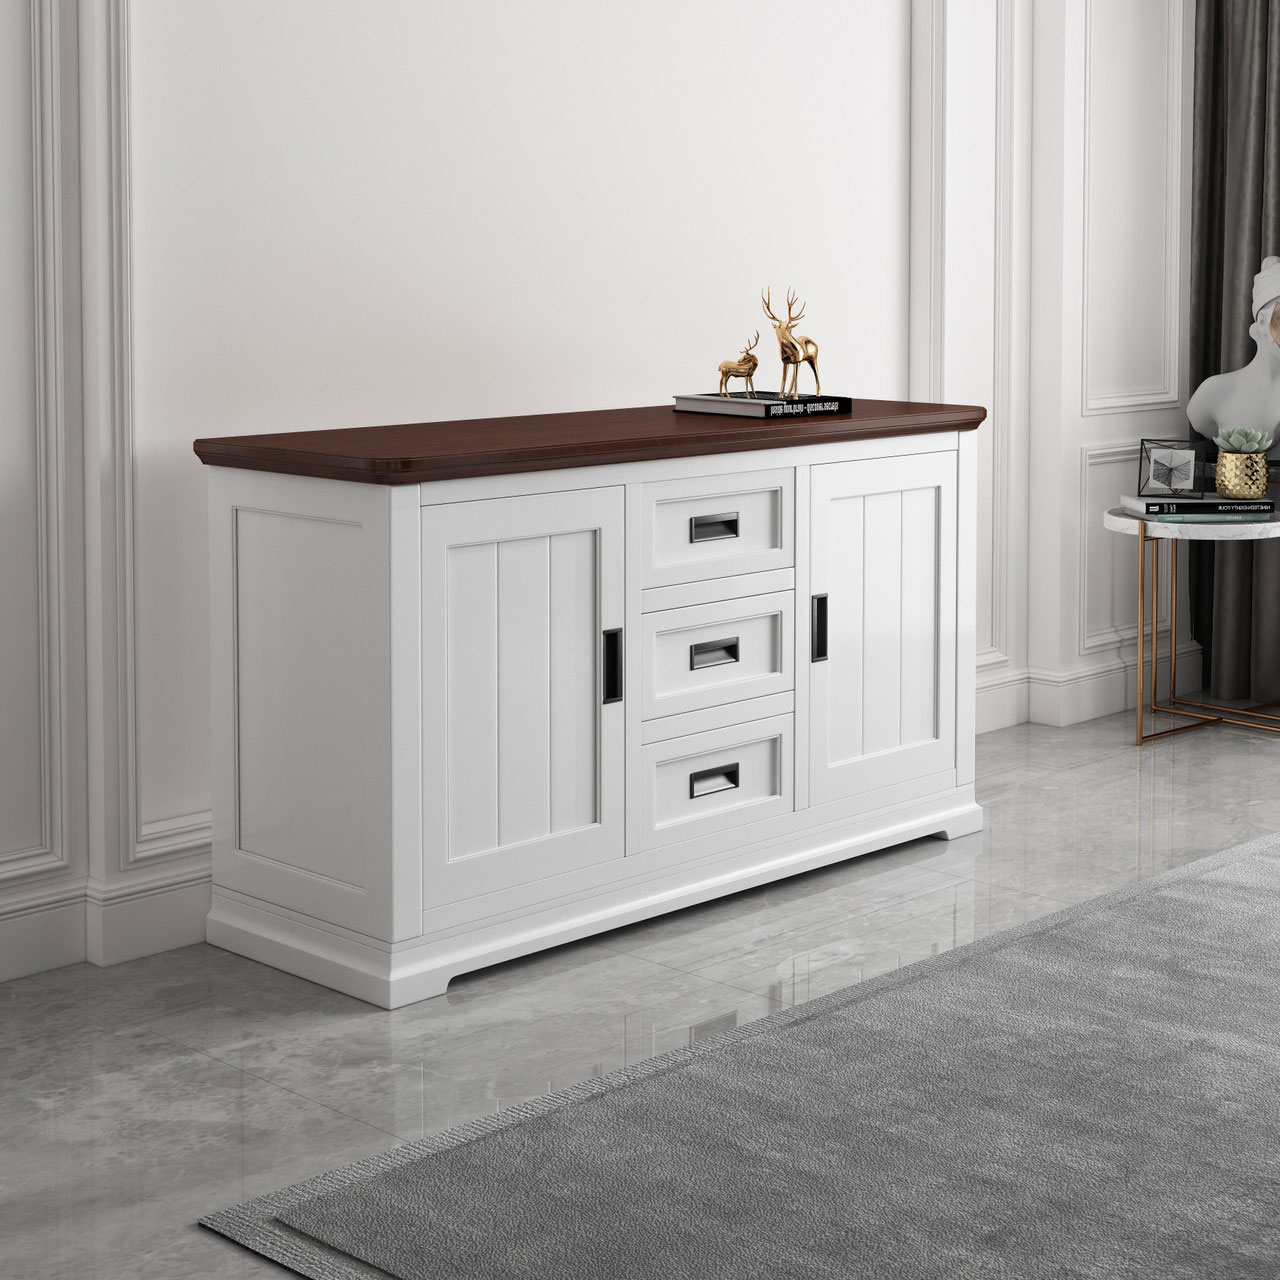 Cardinia 160cm Sideboard With Wooden Top CP011 - Hallams Home